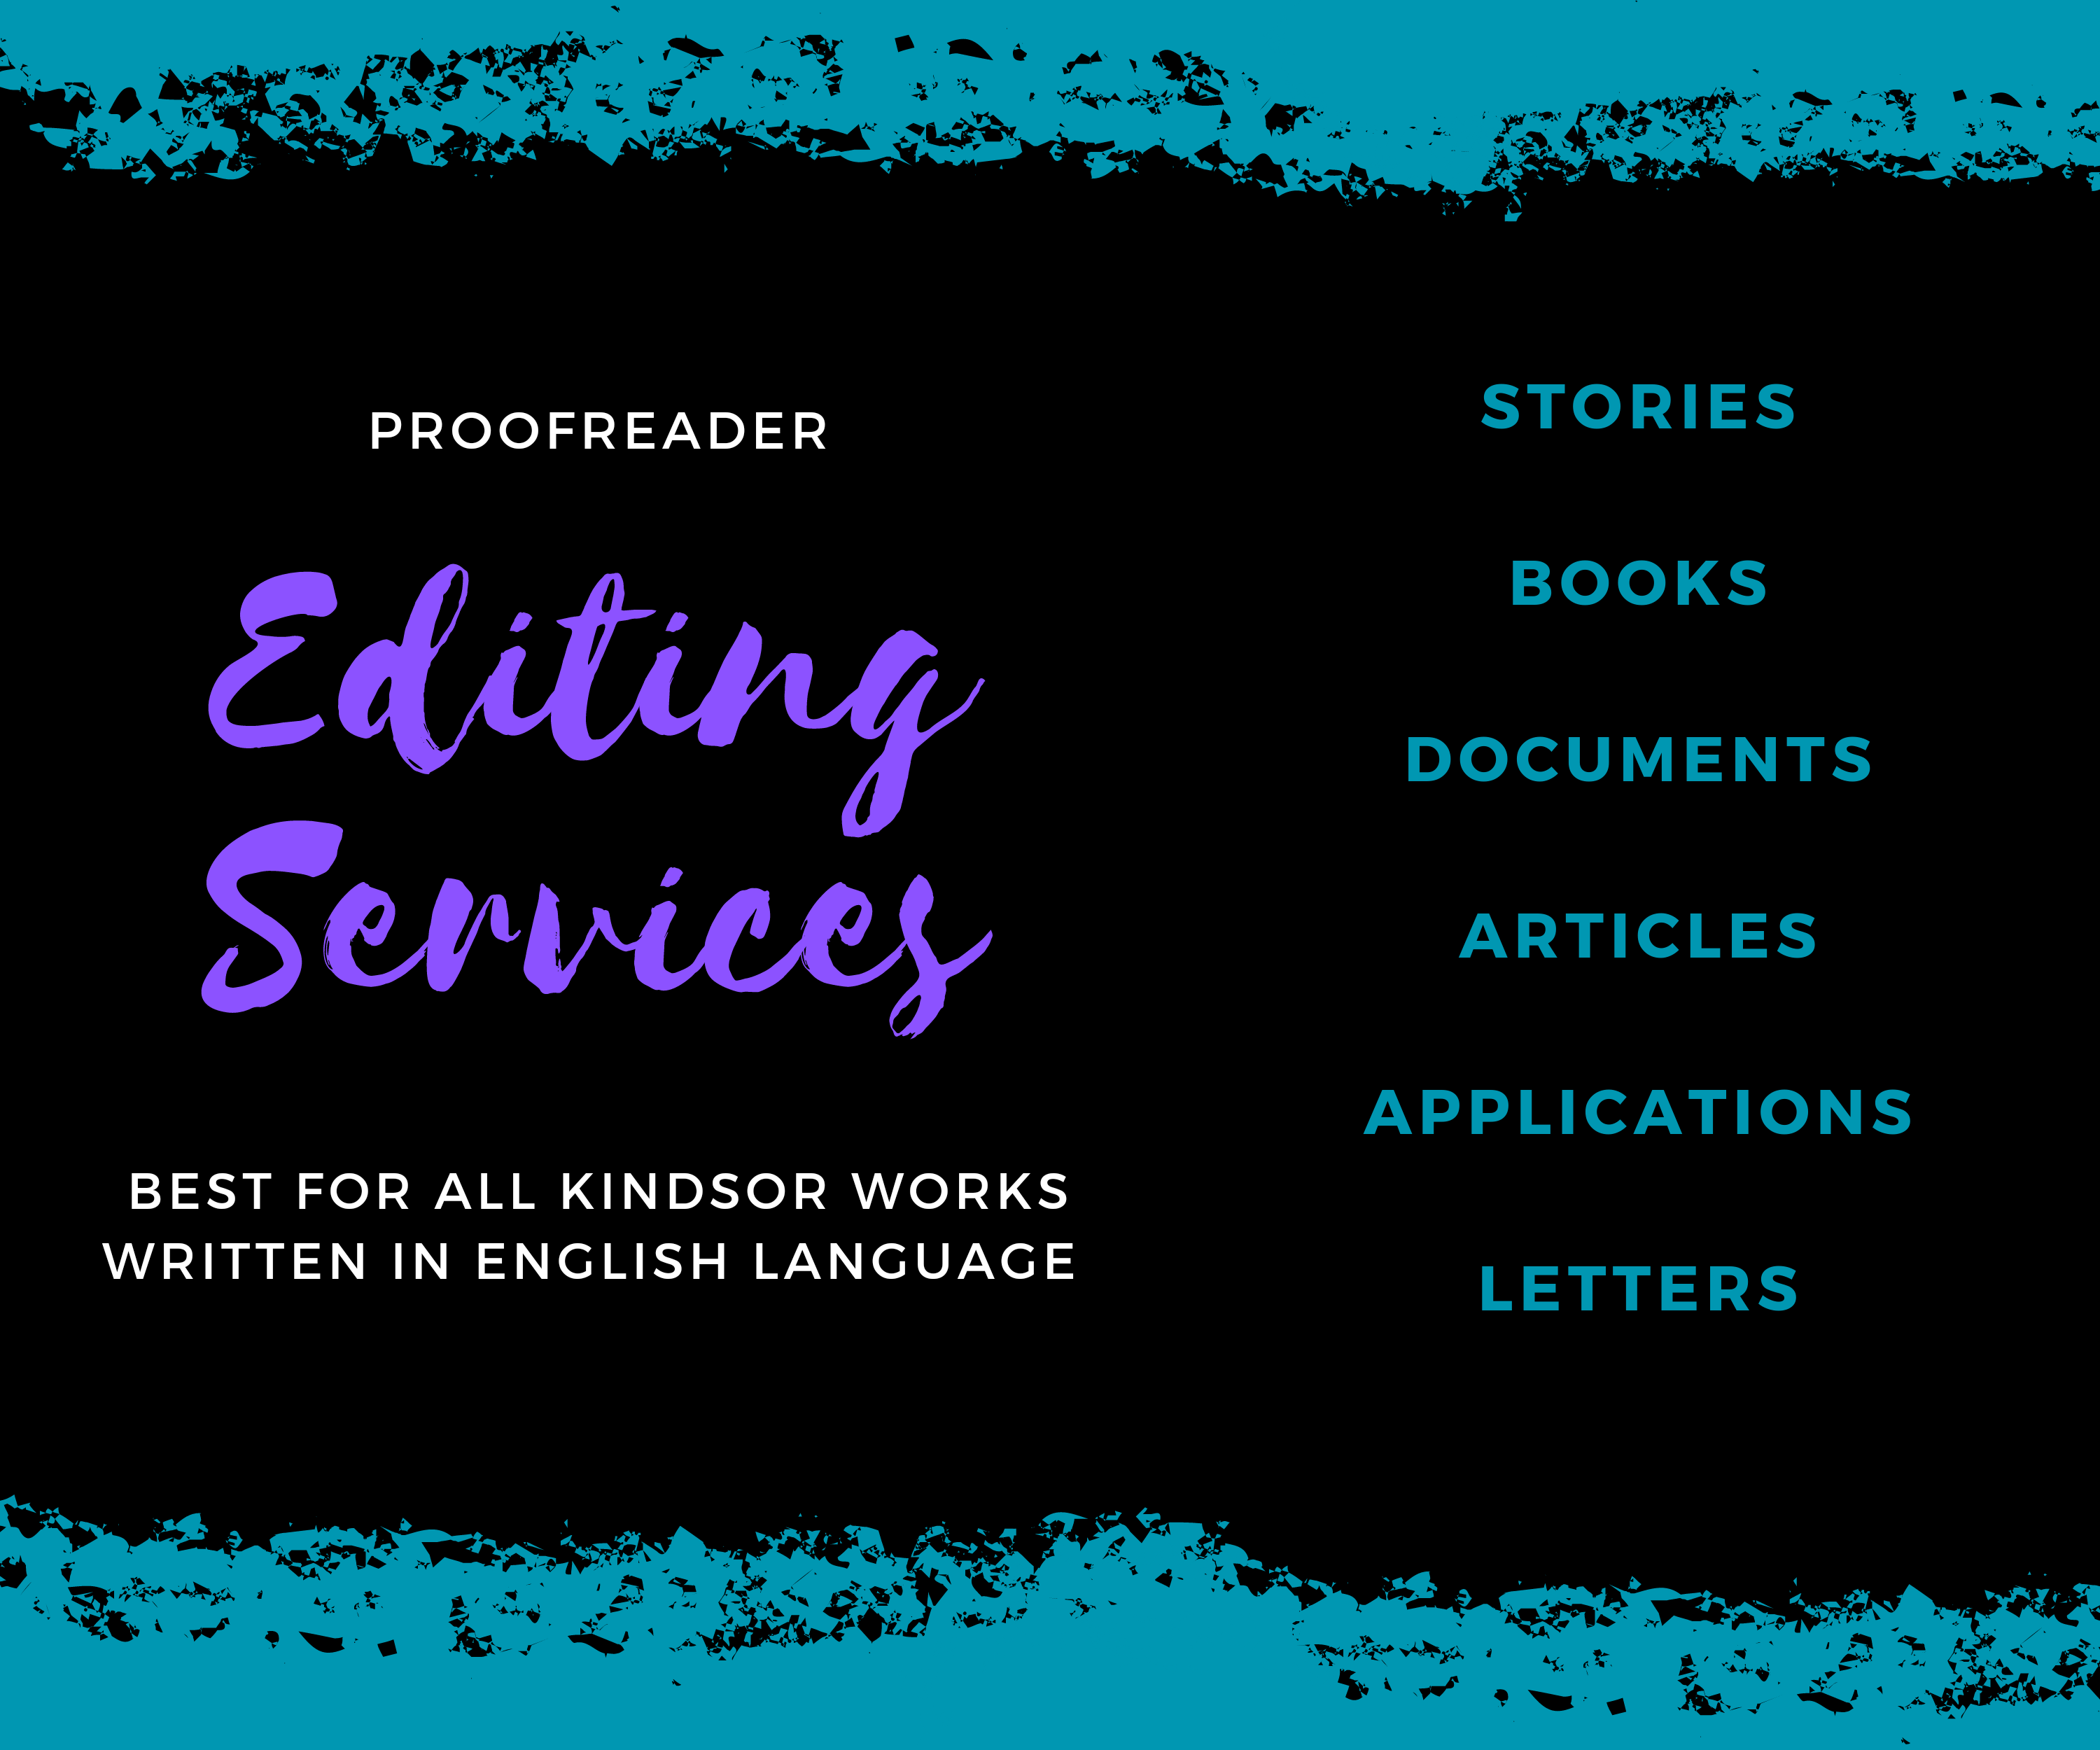 131189Proofreader and editor